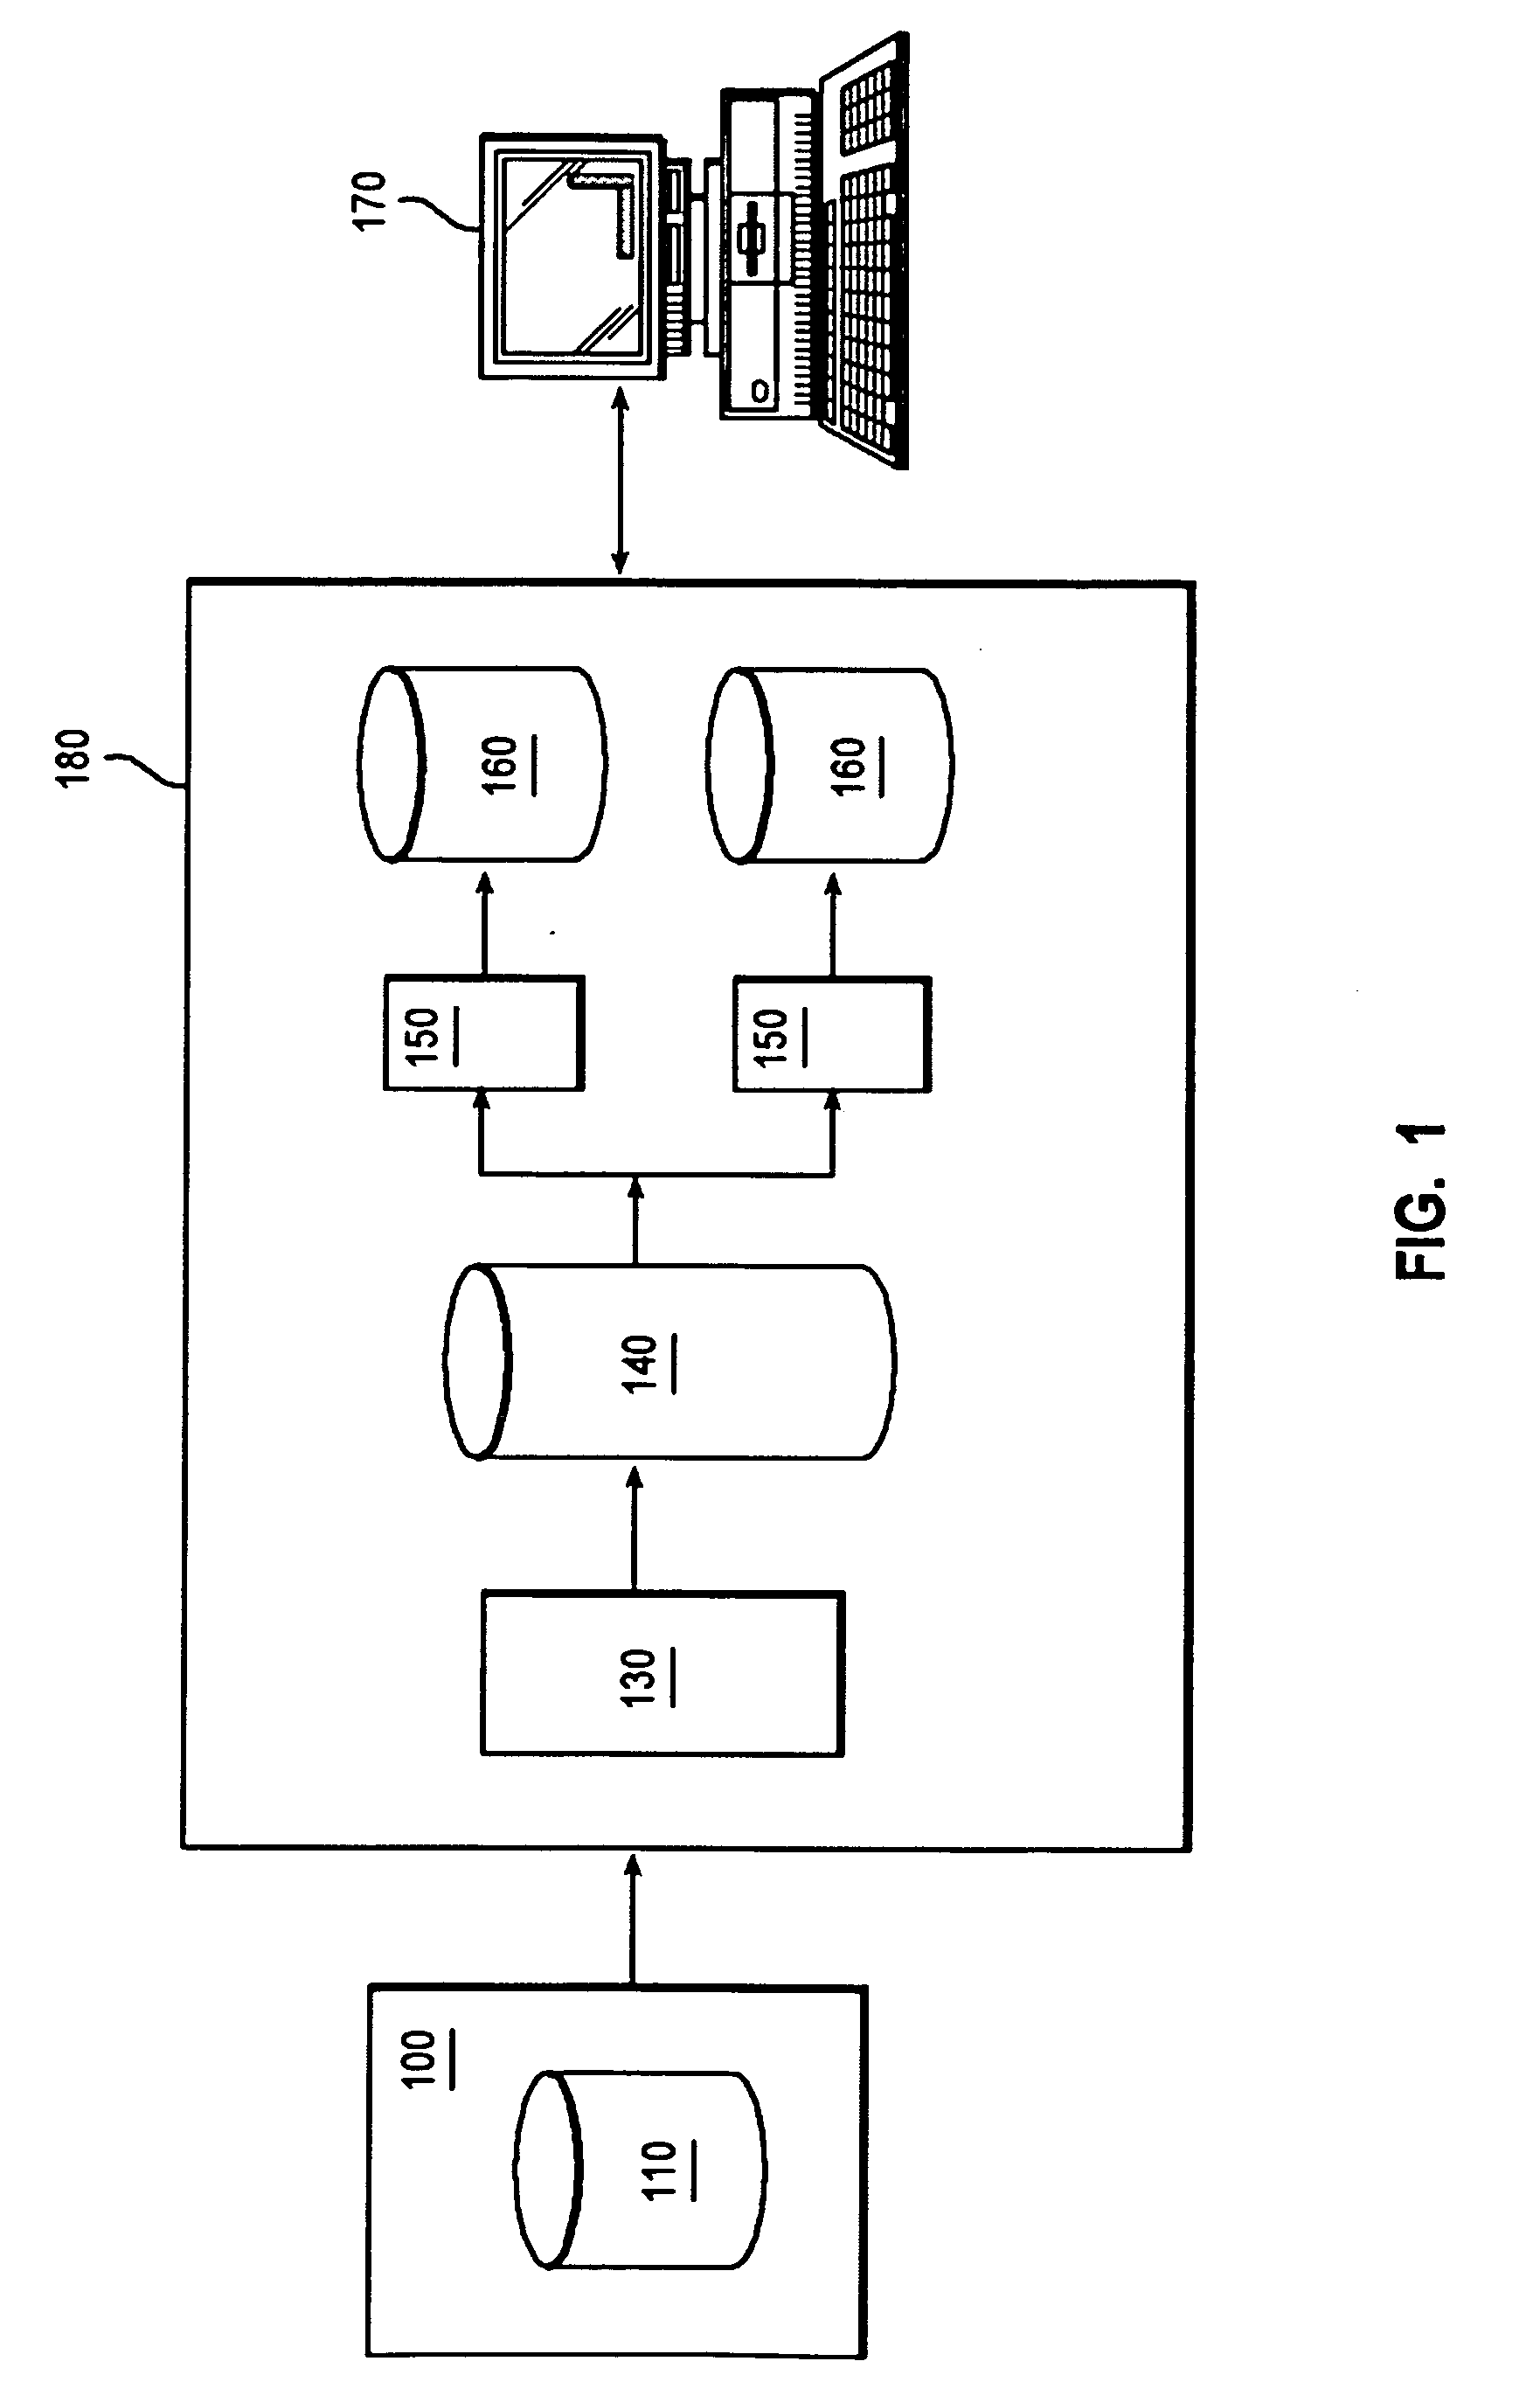 Method and system to load information in a general purpose data warehouse database